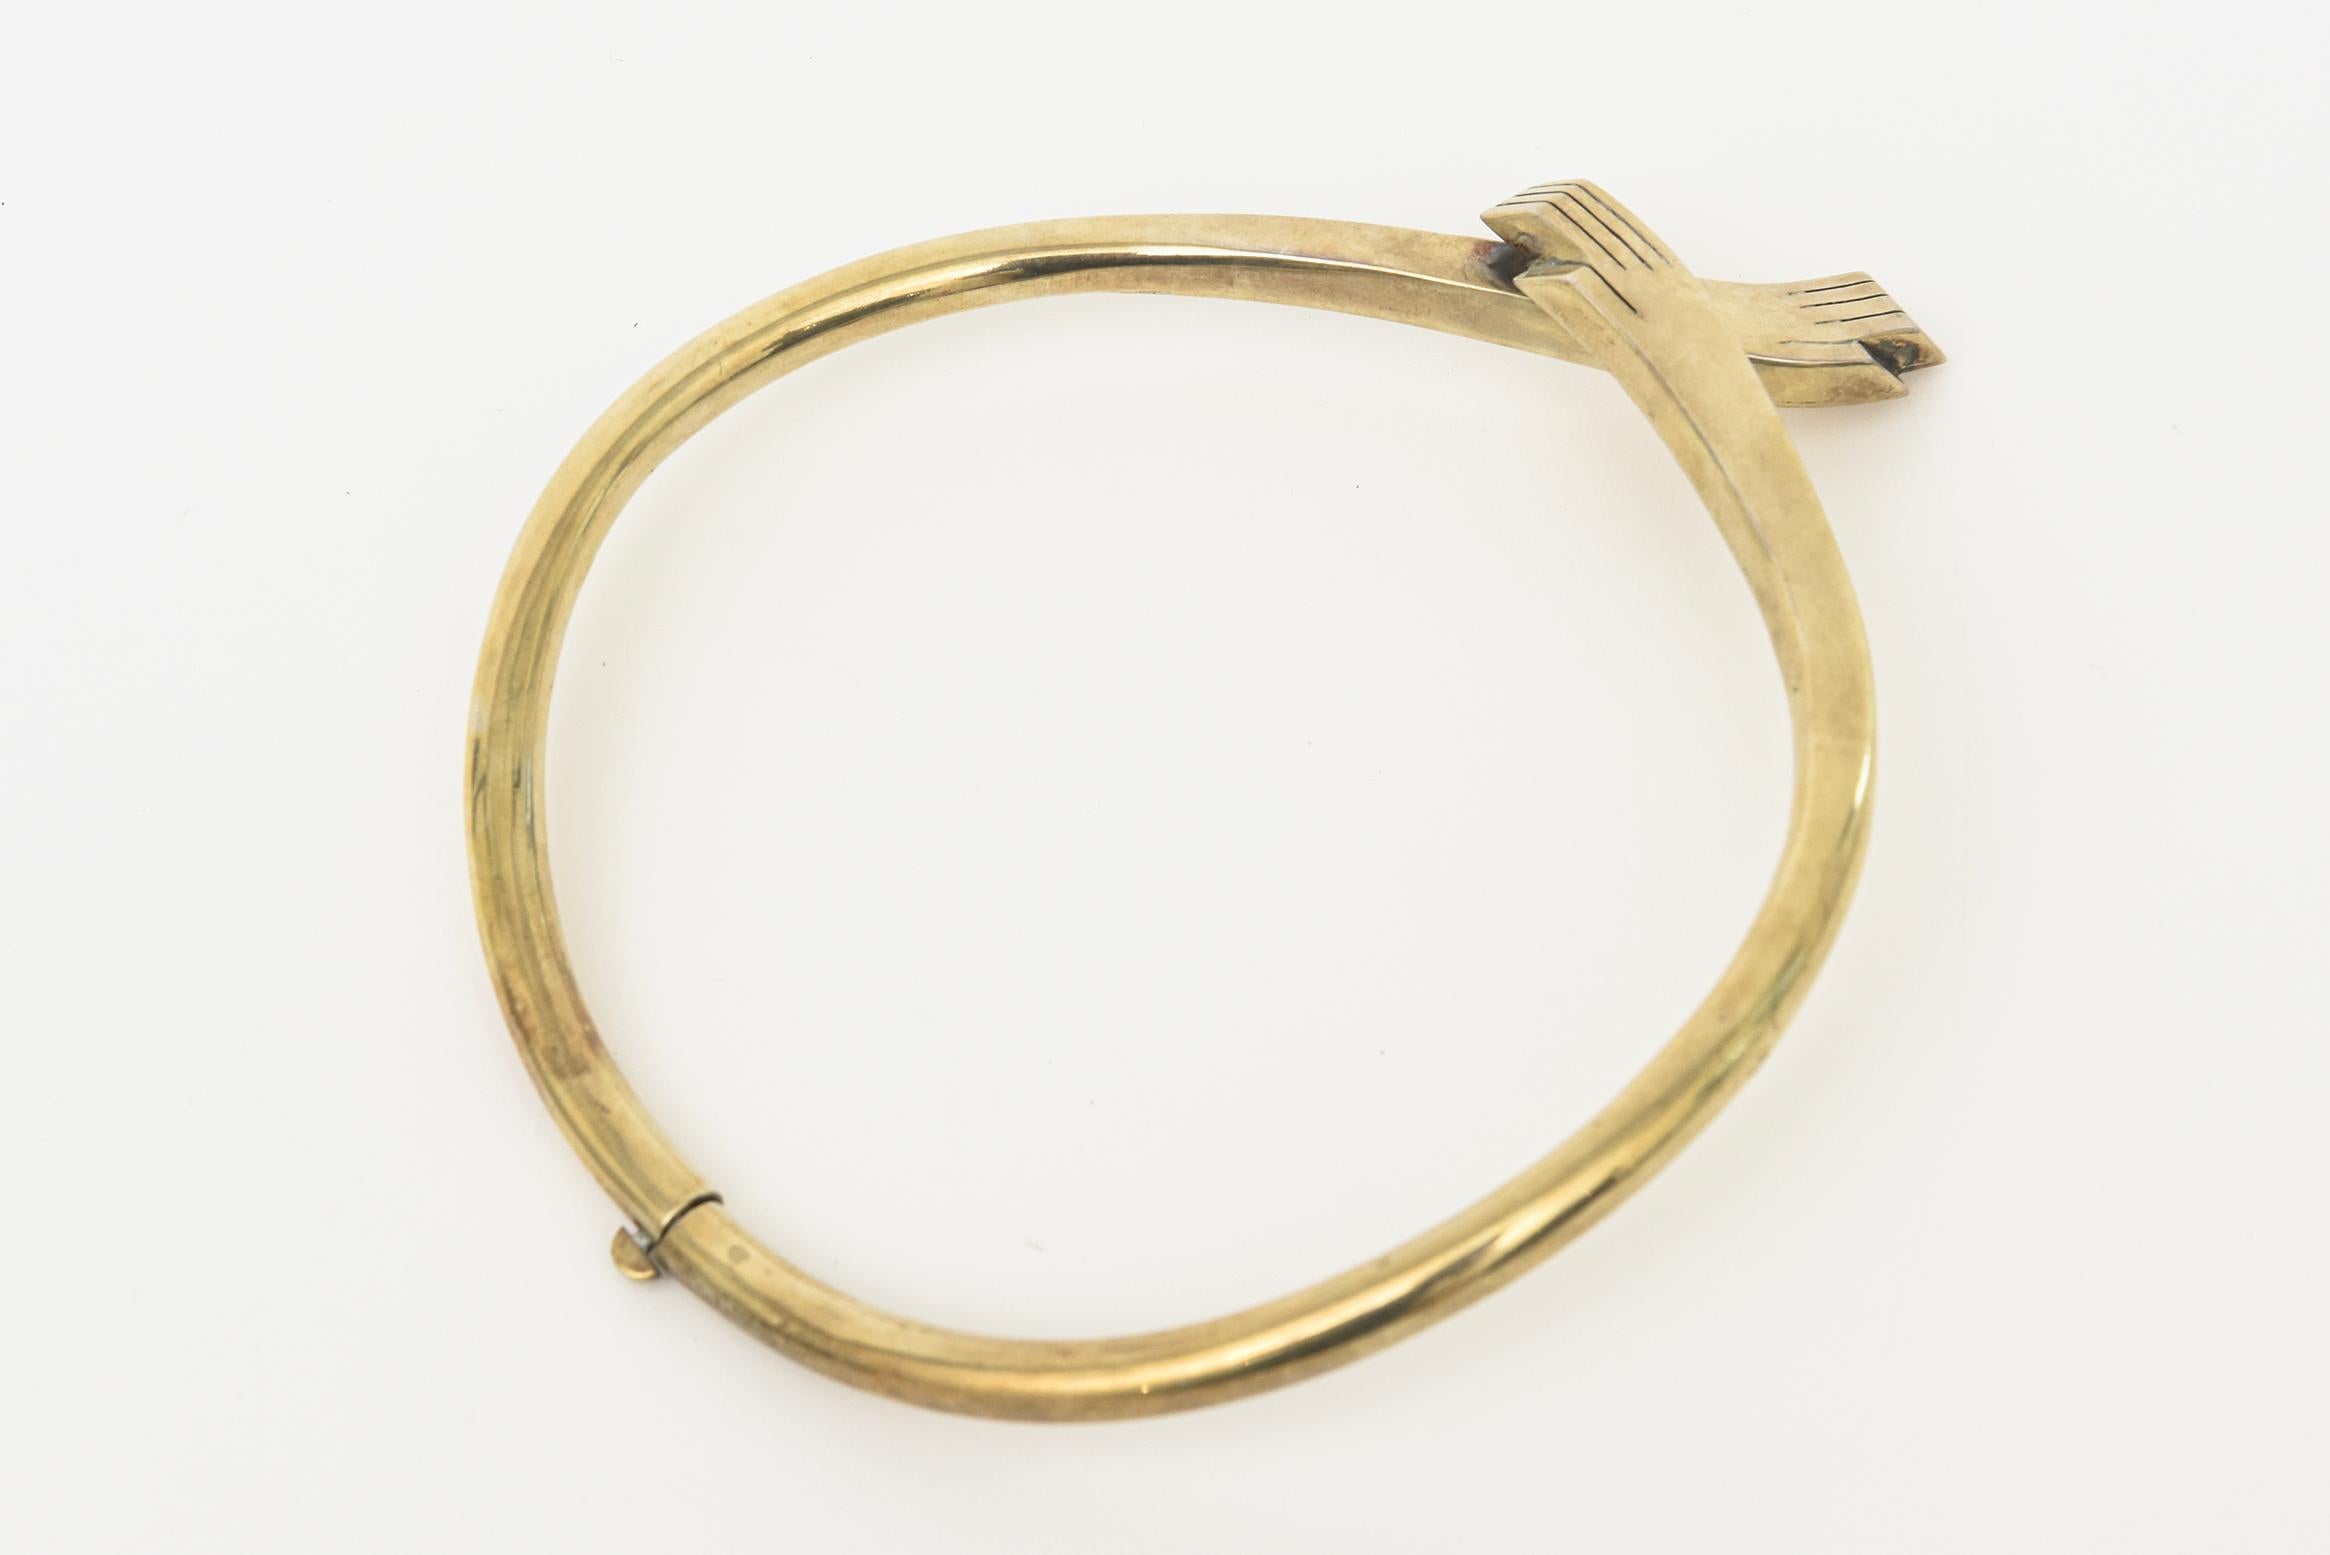 This very rare vintage brass mid century modern hallmarked and signed Los Castillo collar necklace is abstract. It is one of interlocking modernist hands in the front. Modern, artful and sculptural. Hallmarked Los Castillo 191 or 161 with symbol.